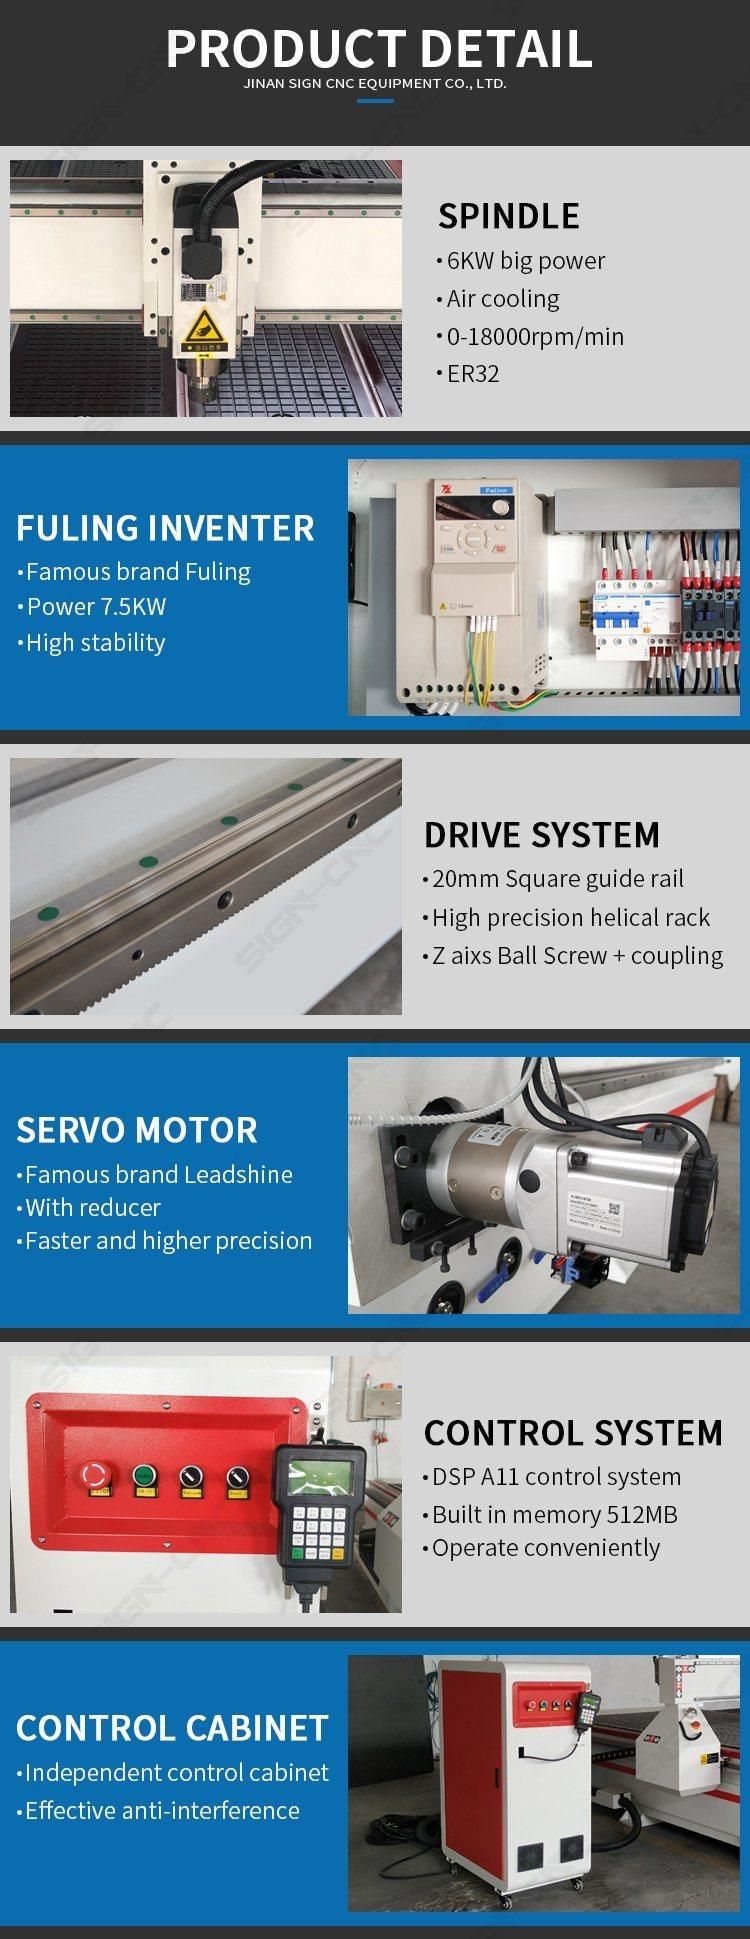 3 Axis Wood Router A2-1325 Equipped Servo Motor CNC Machine